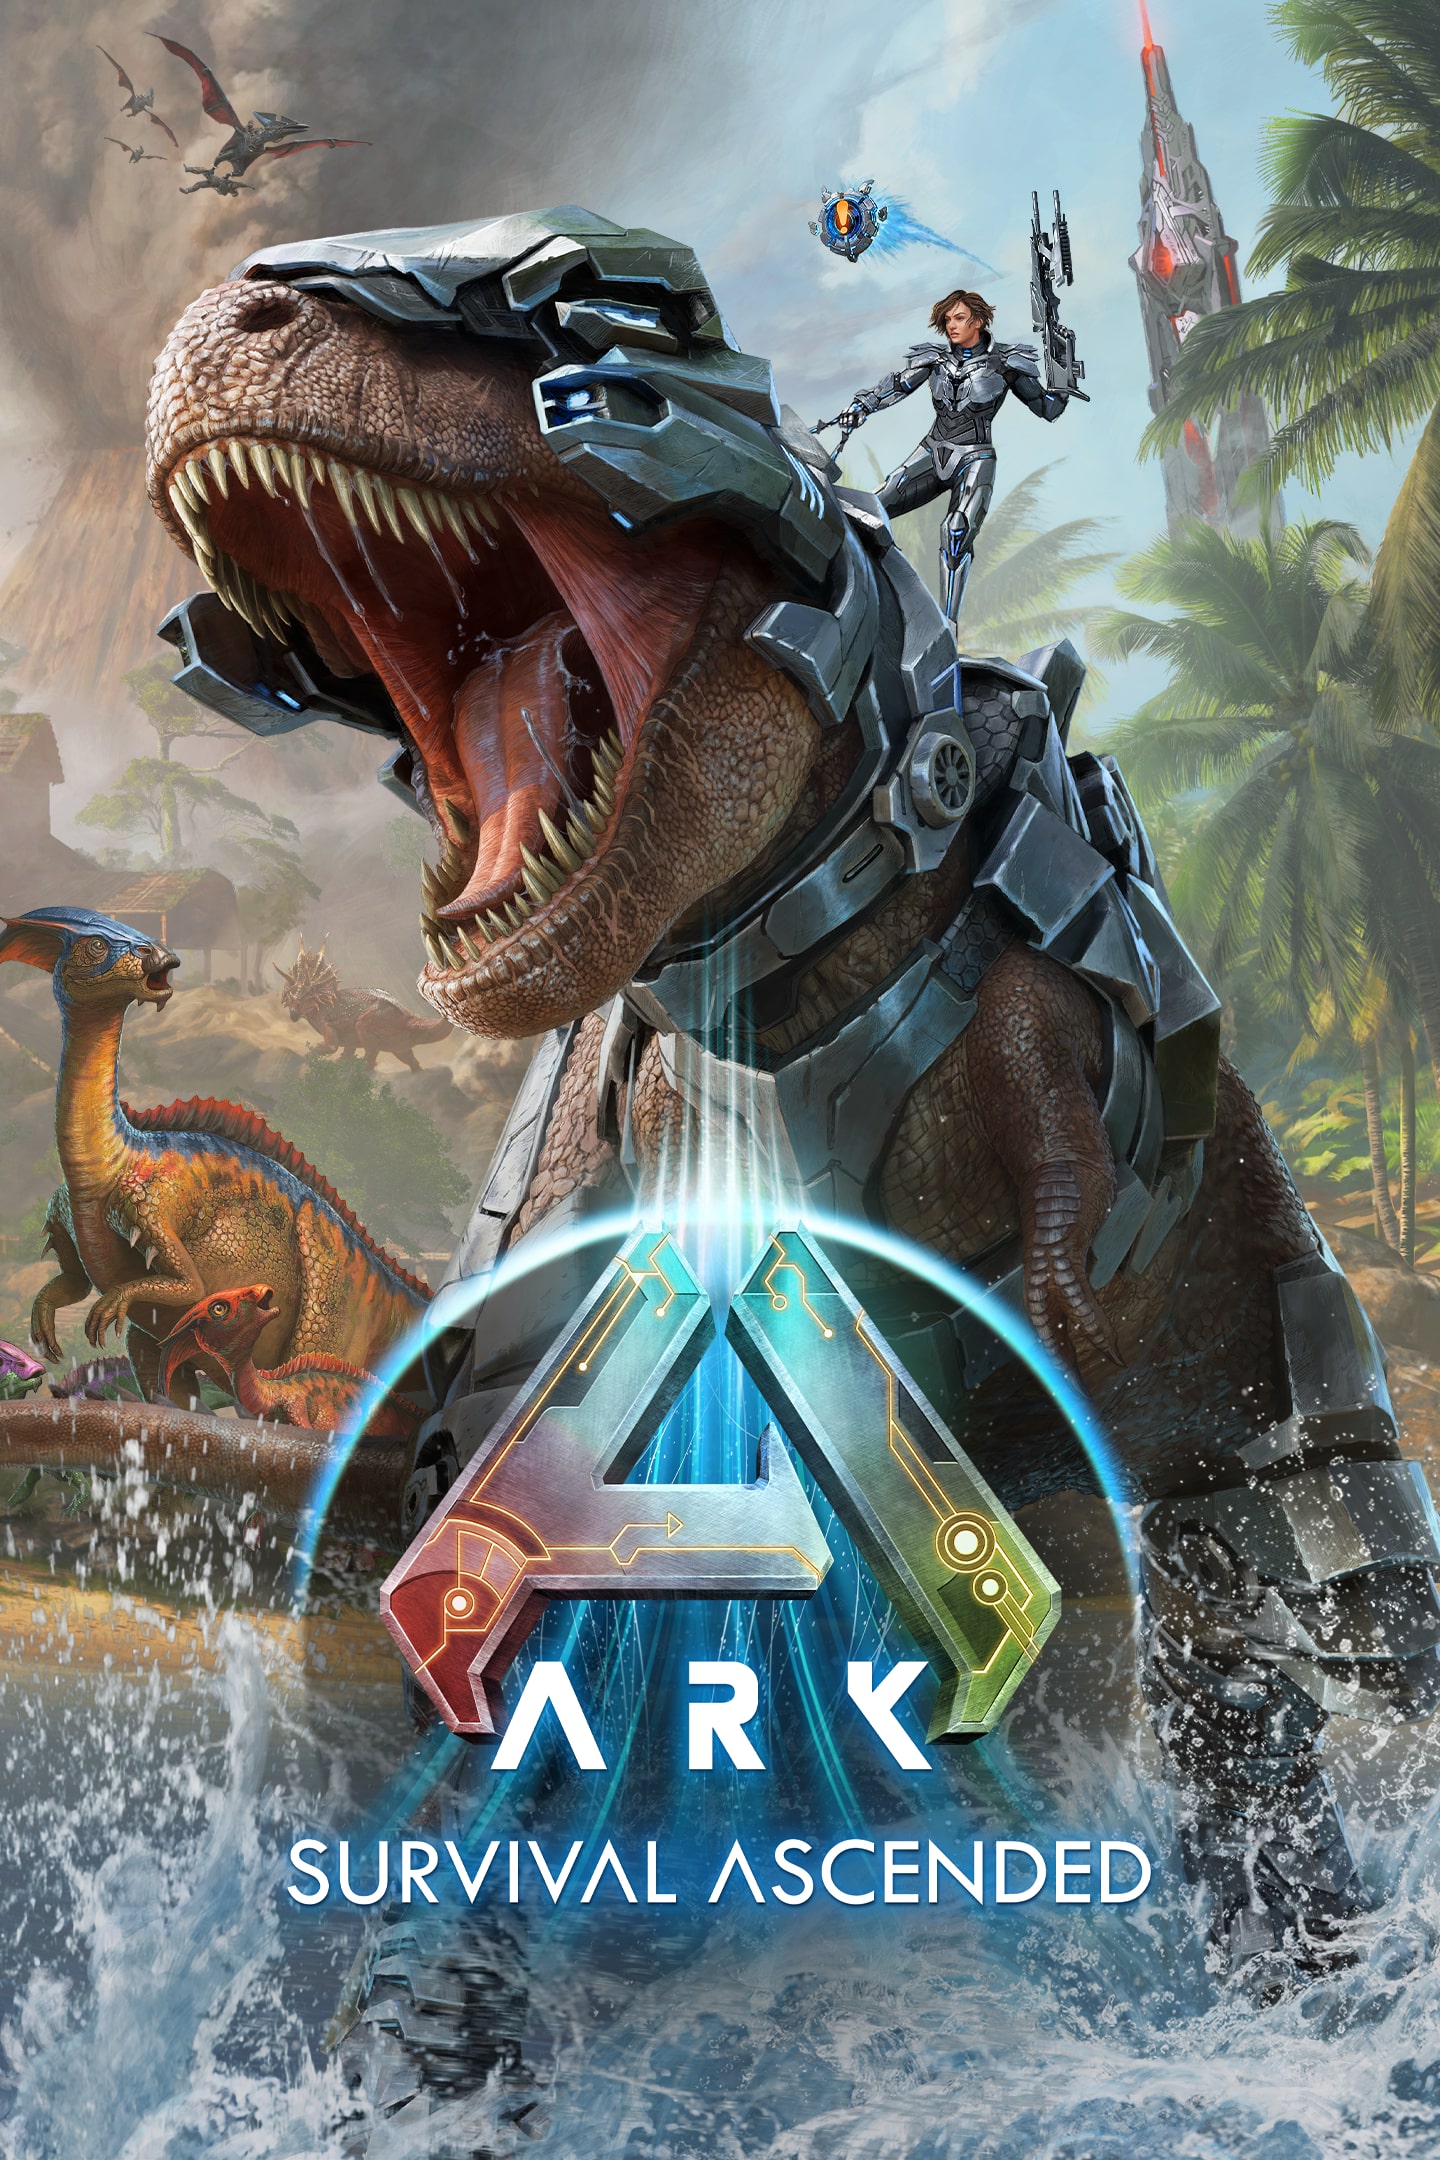 Ark: Survival Ascended PS5 set to release this Thursday 11/30 : r/playark